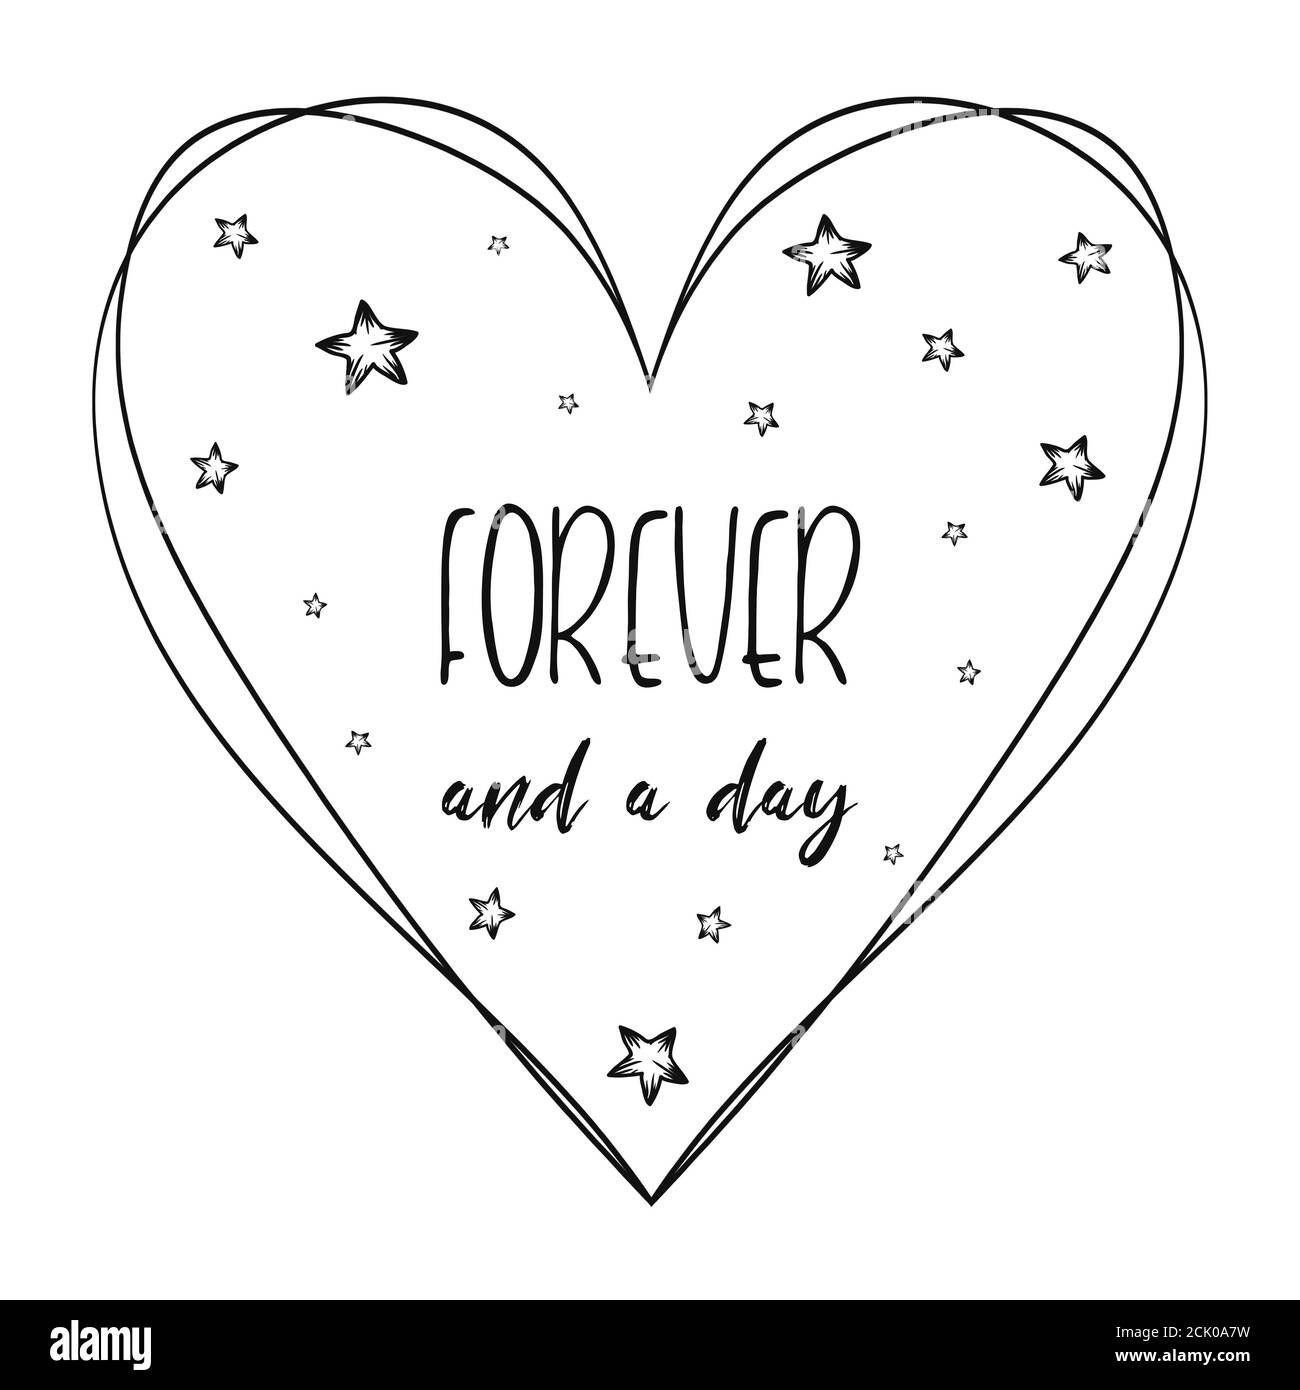 Romantic quote, love you forever and a day, minimalistic text art  illustration with the heart symbol, stars decorations and lettering  composition. Con Stock Photo - Alamy